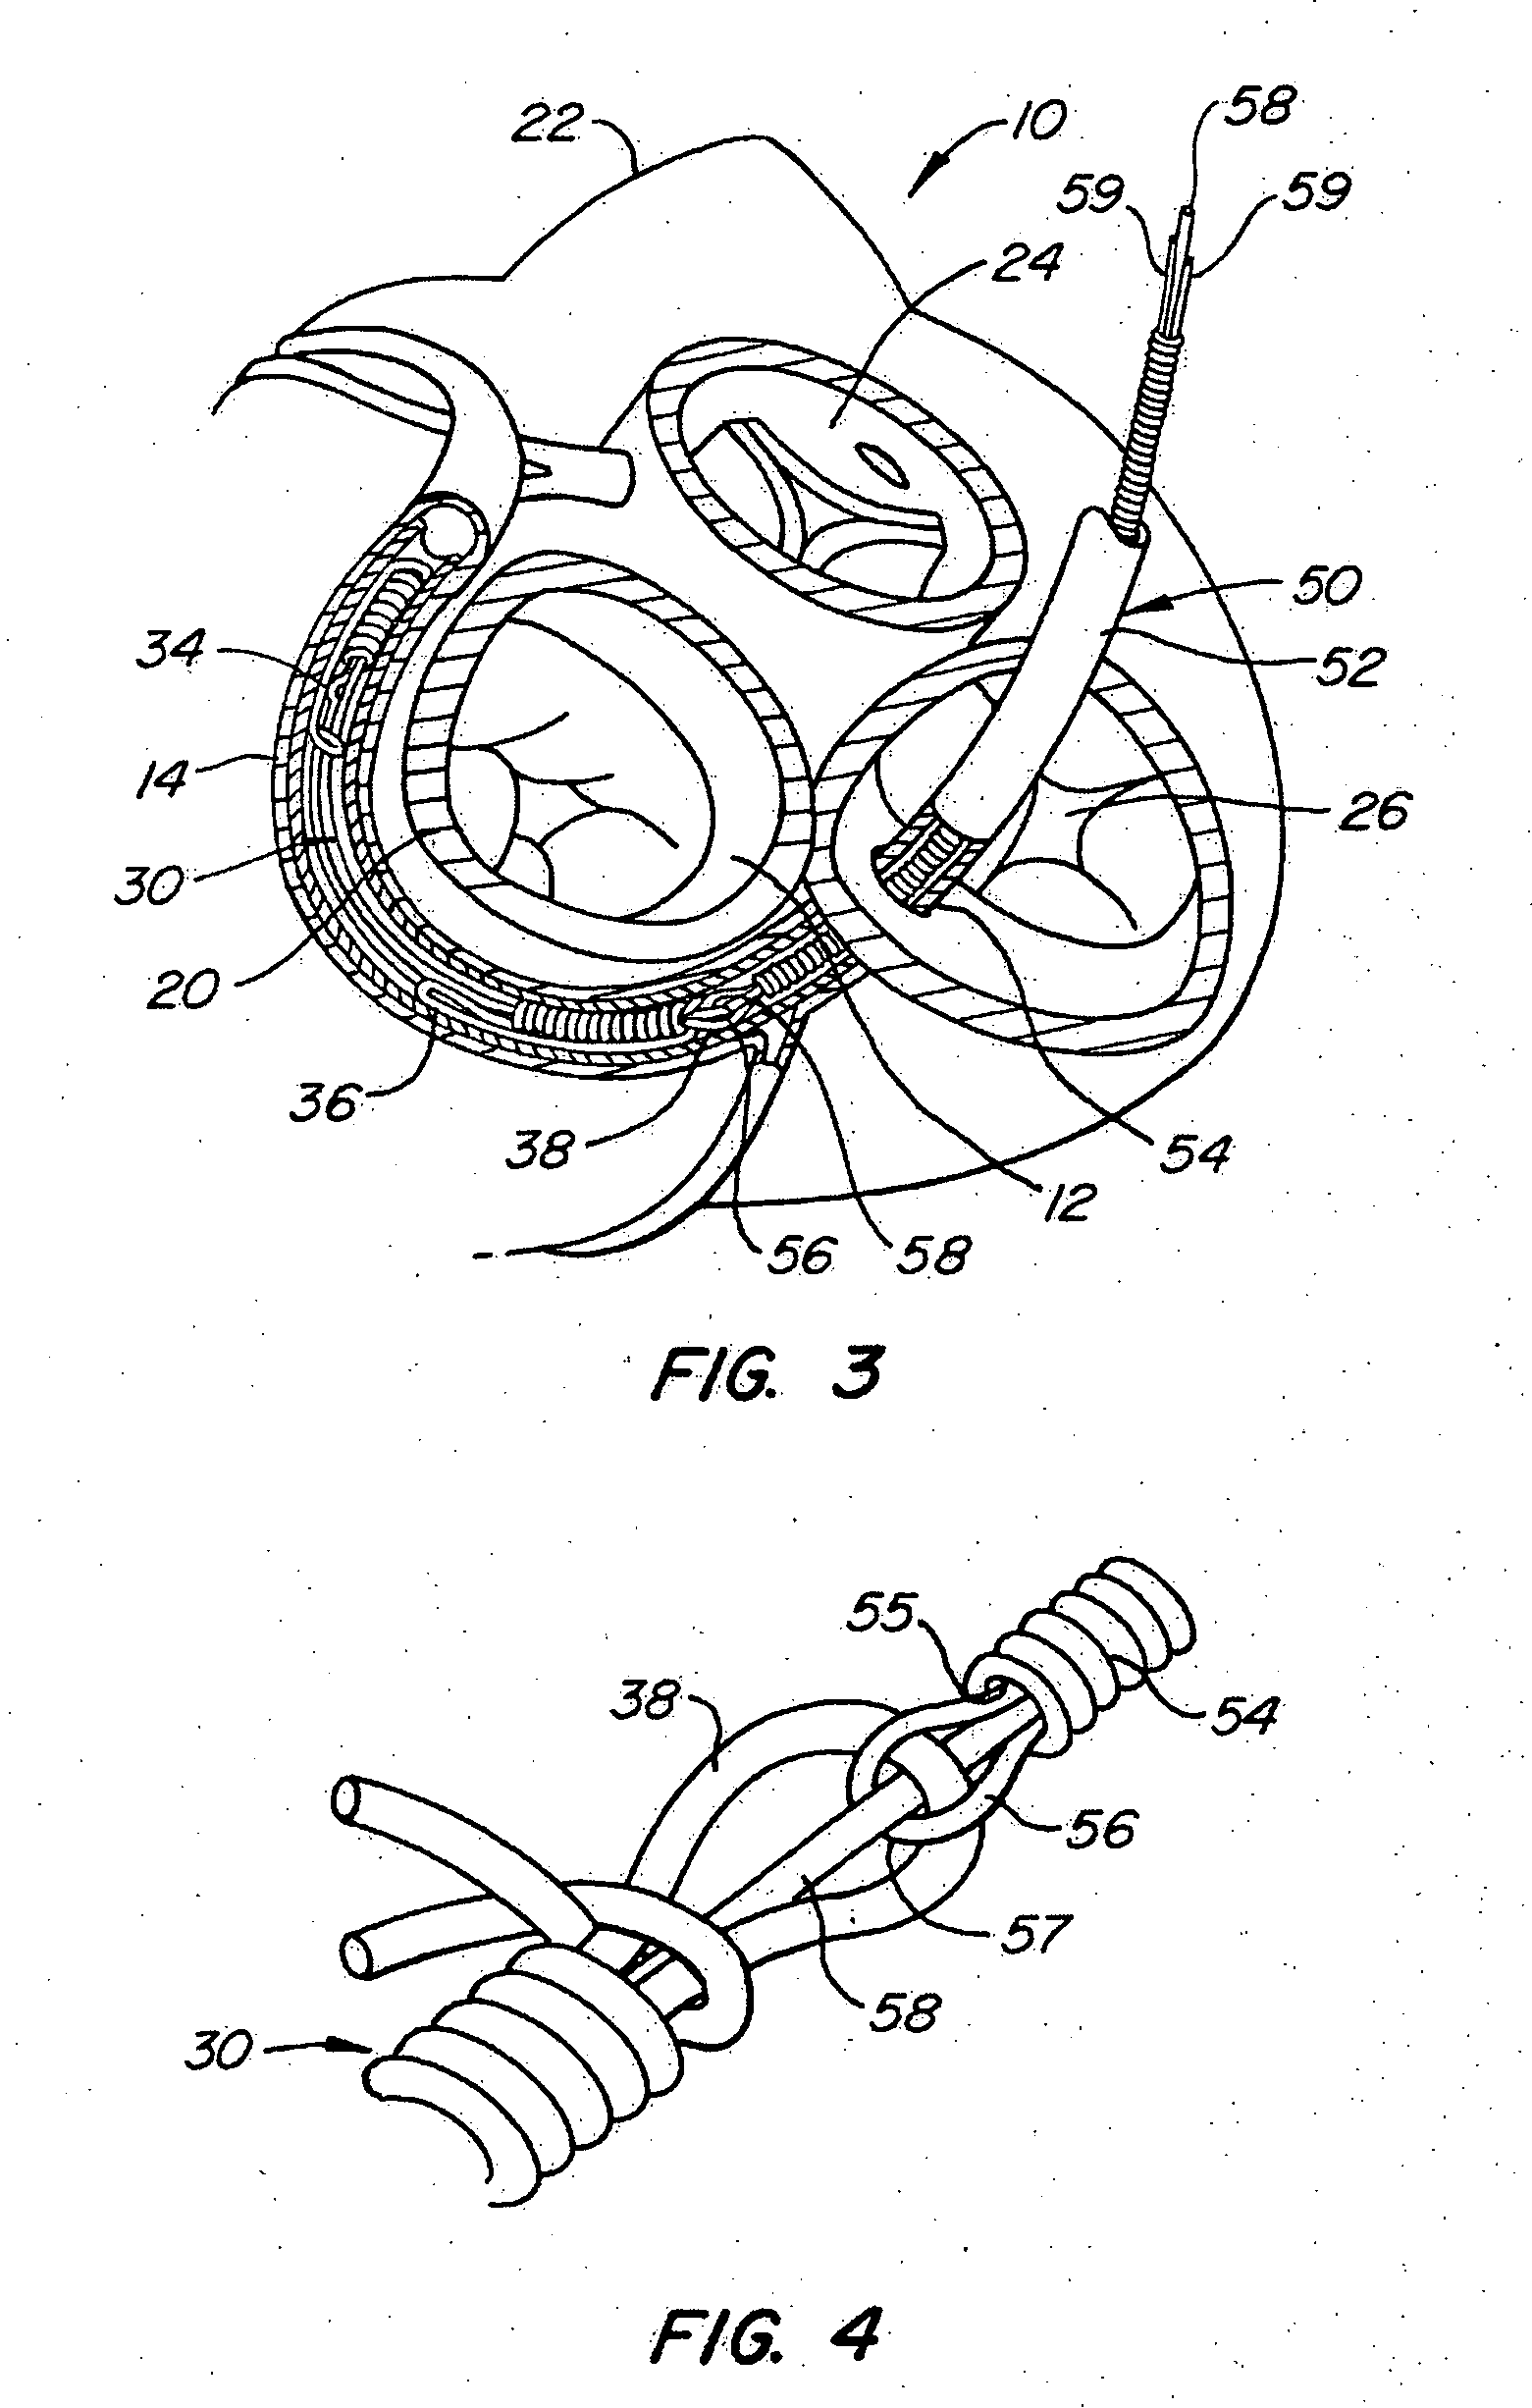 System and method to effect the mitral valve annulus of a heart